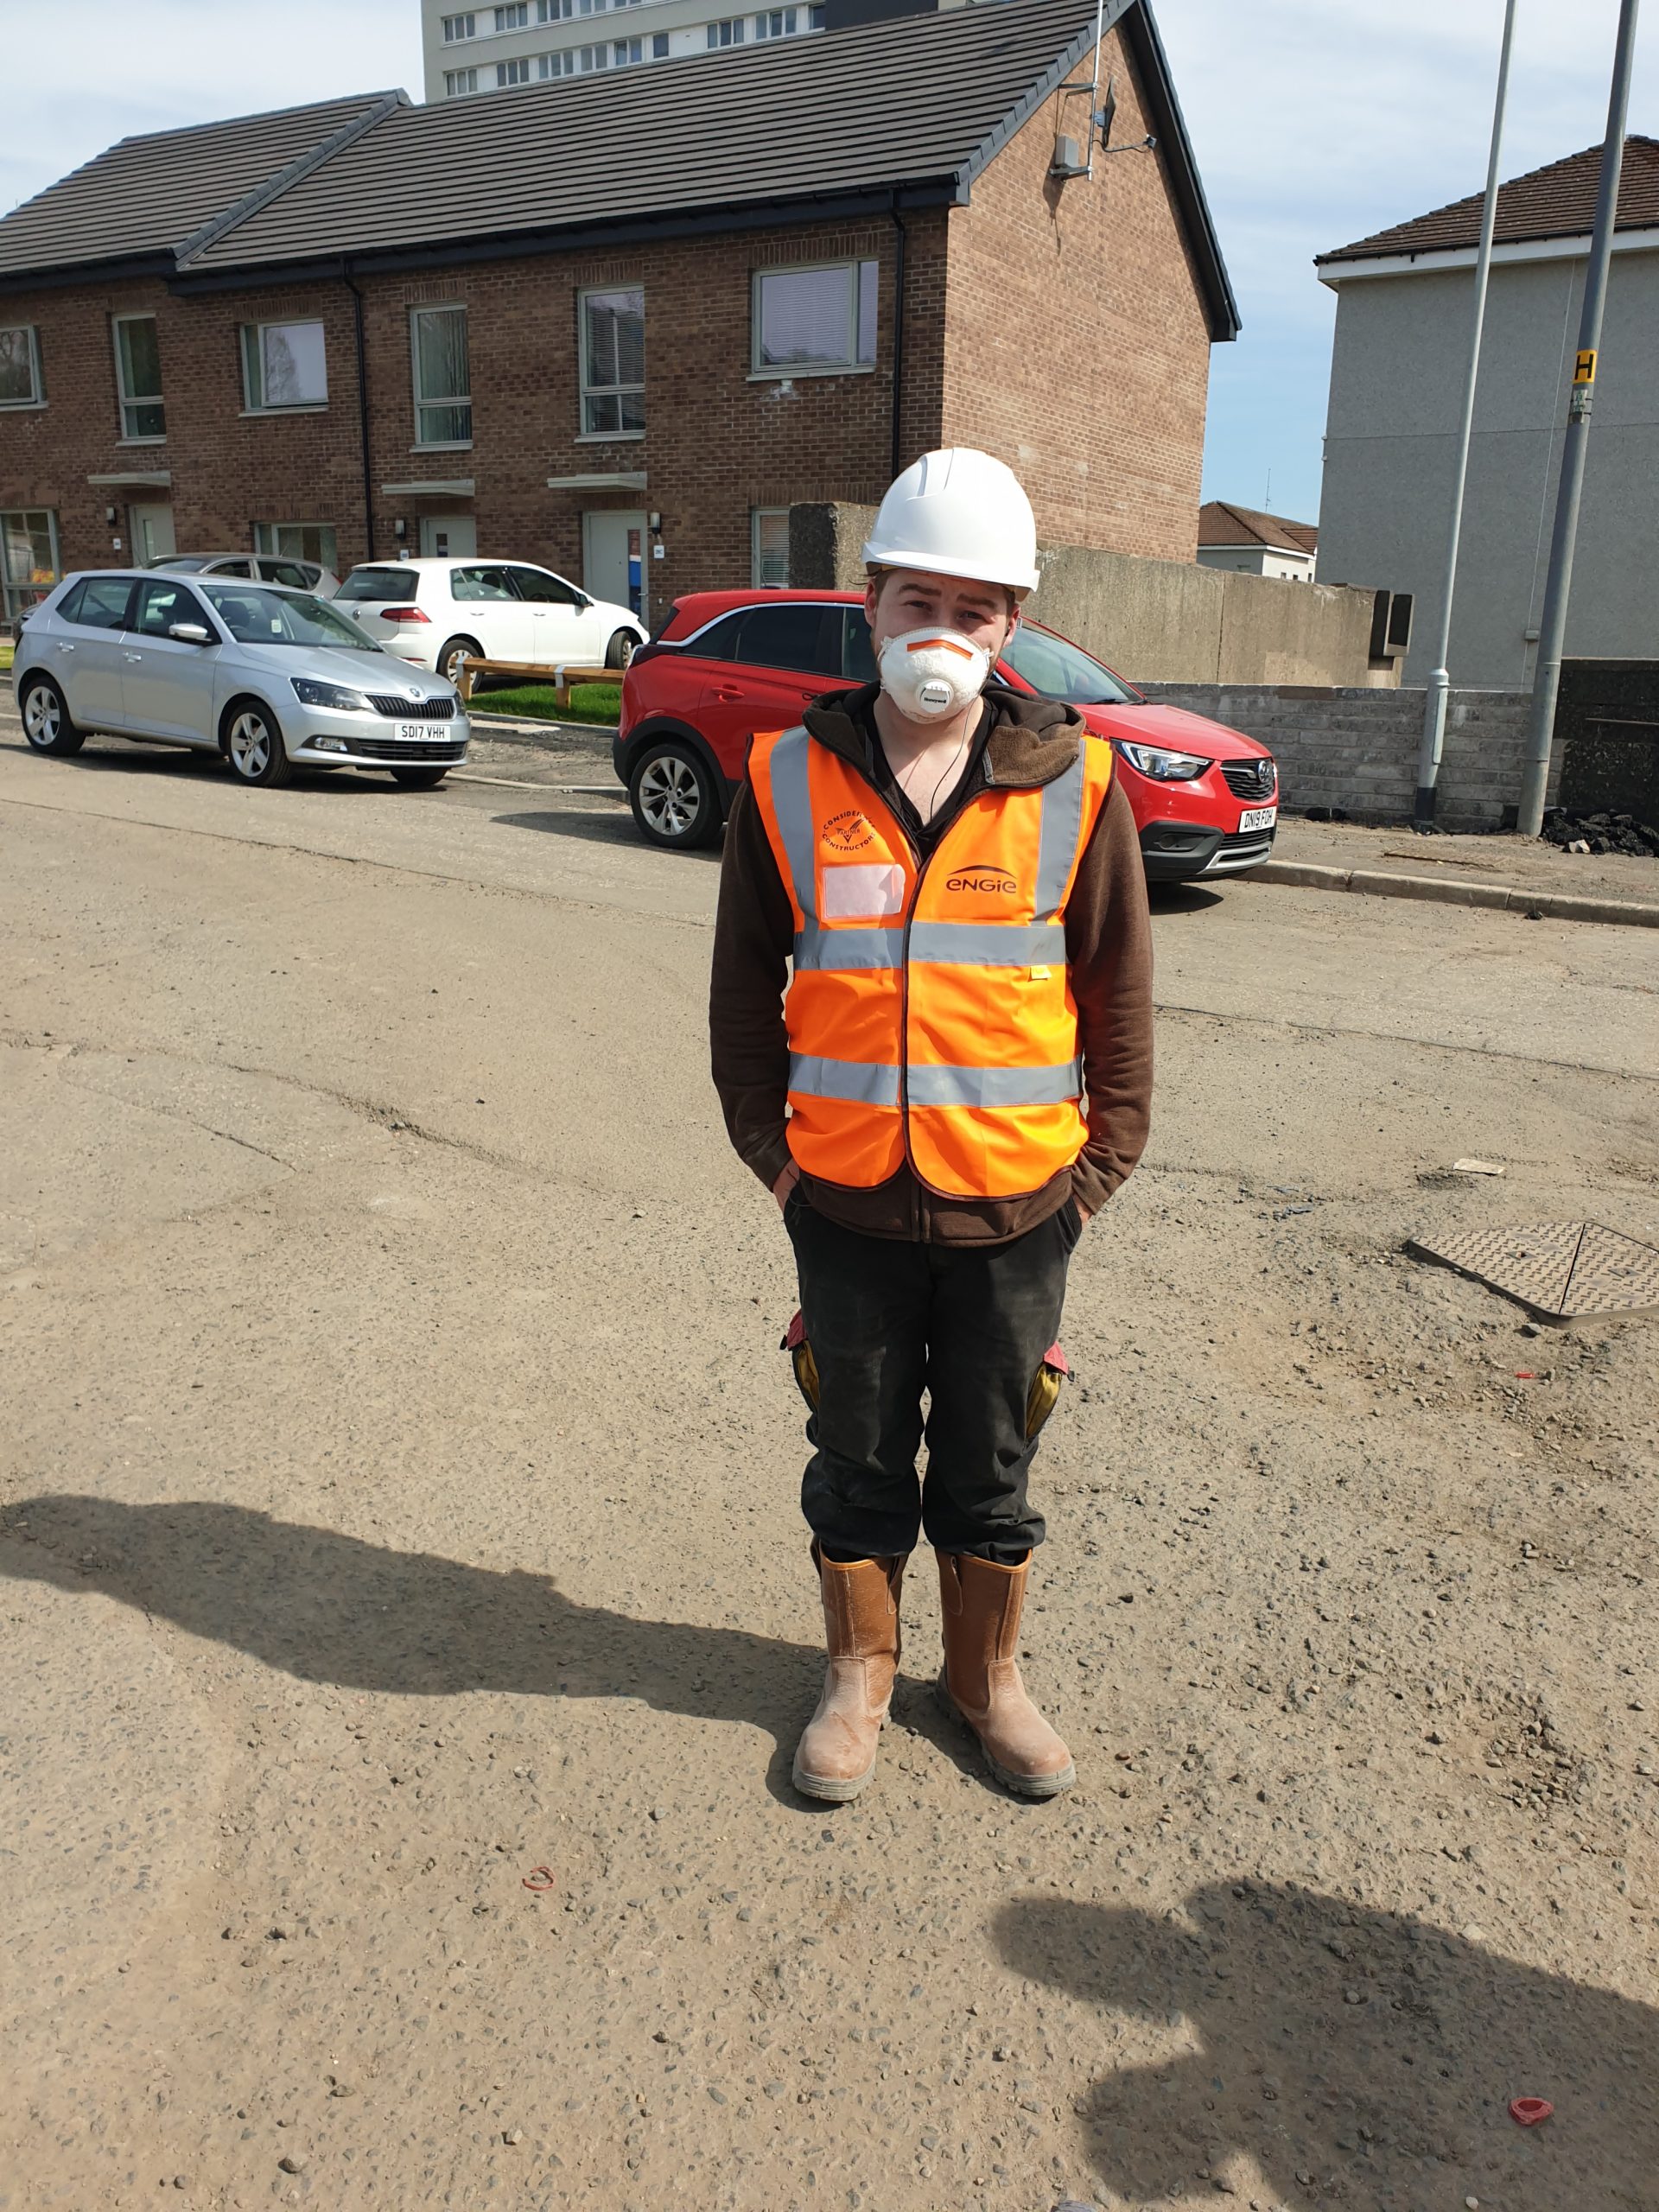 A builder standing in their work clothes